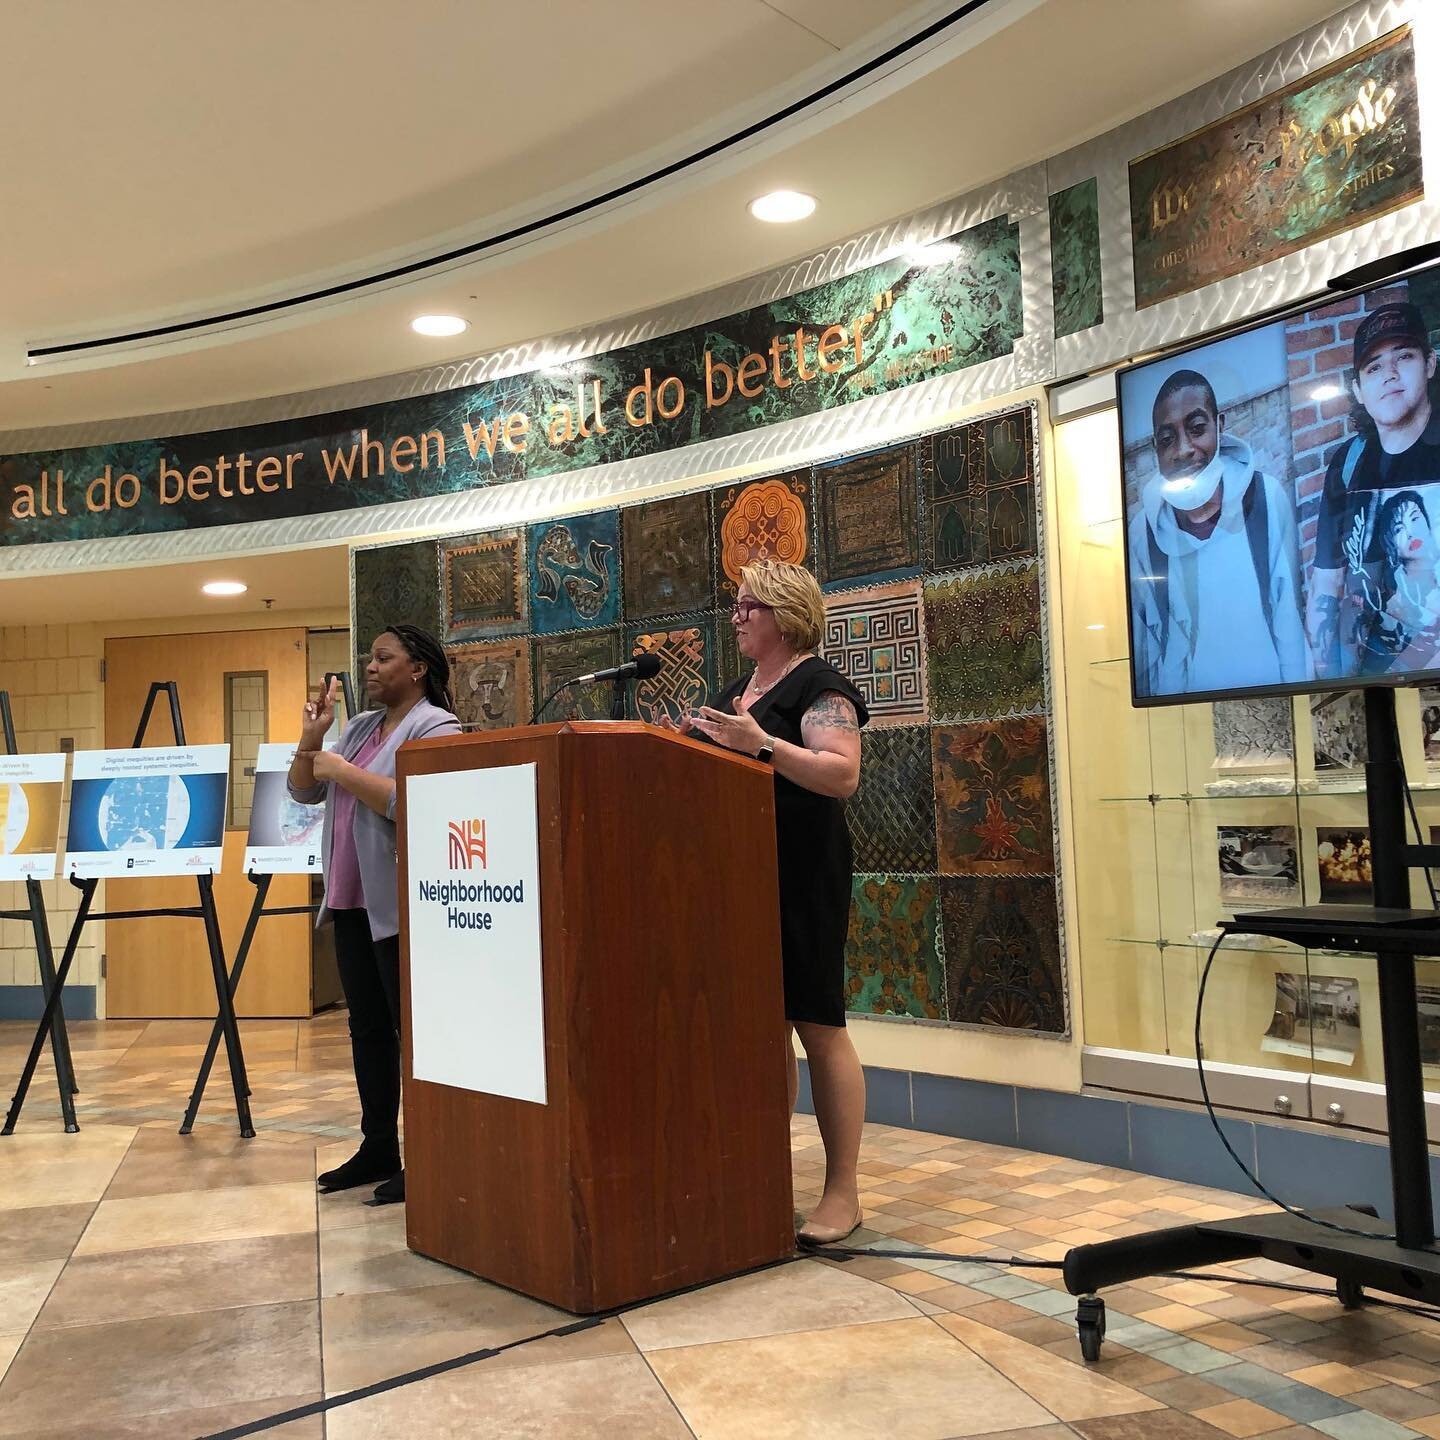 This afternoon Saint Paul Promise joined Ramsey County Commissioner and Board Chair Trista MatasCastillo, Saint Paul Mayor Melvin Carter, Ward 6 Saint Paul City Council Member Nelsie Yang, and President of Neighborhood House Nancy Brady to share the 